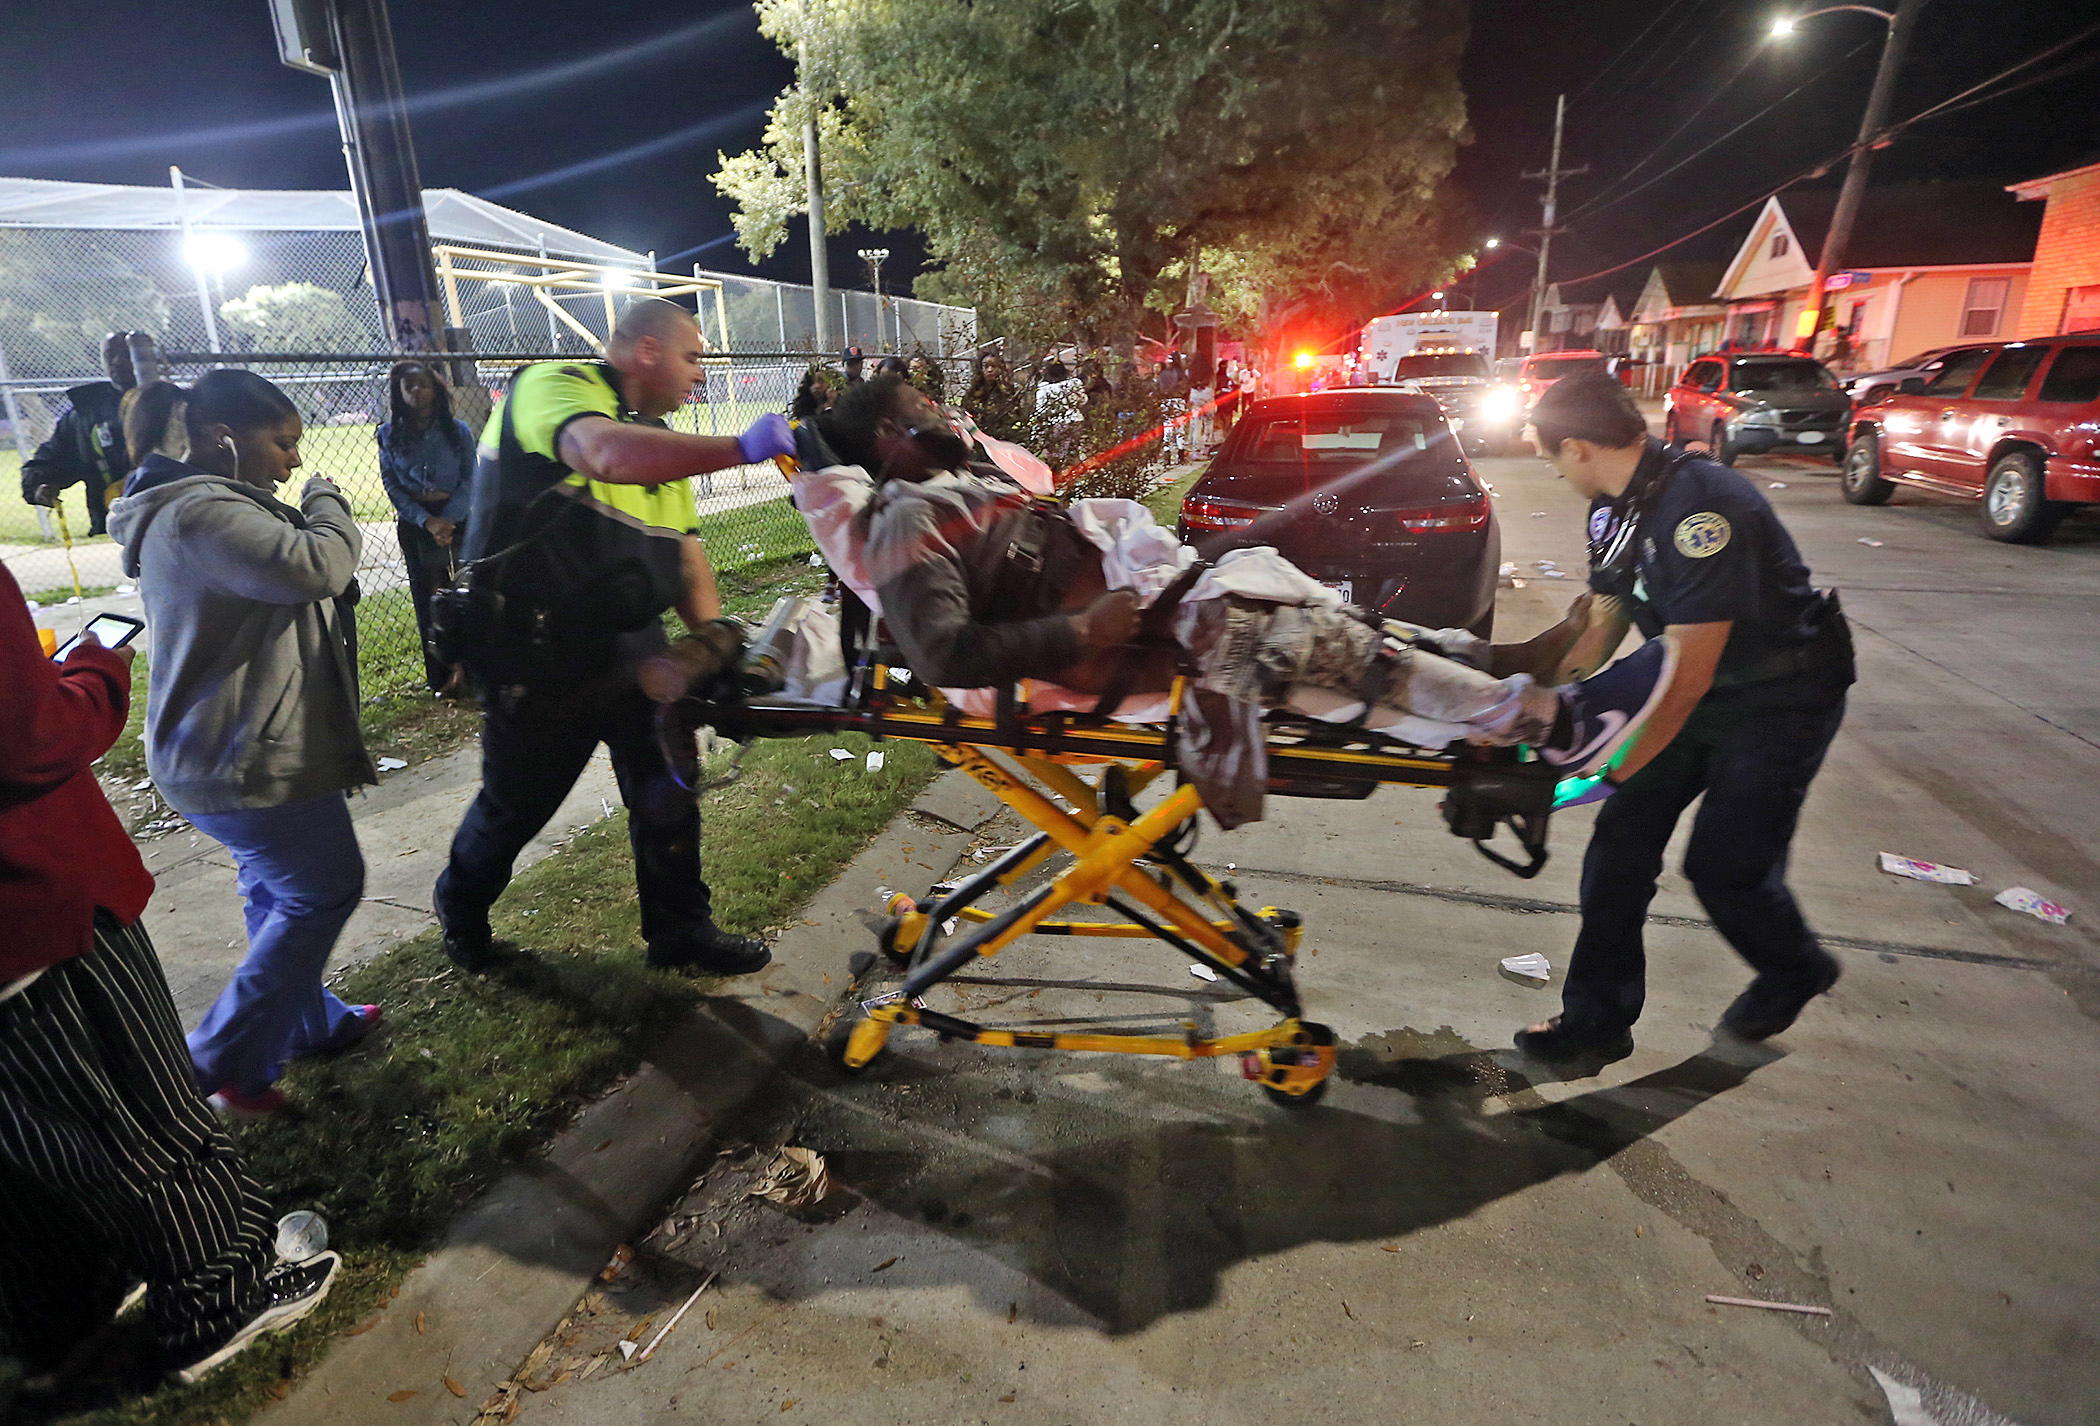 Officials remove a man from the scene following a shooting in New Orleans' 9th Ward on Sunday, Nov. 22, 2015. Police spokesman Tyler Gamble says police were on their way to break up a big crowd when gunfire erupted at Bunny Friend Park. (Michael DeMocker/NOLA.com The Times-Picayune via AP) MAGS OUT; NO SALES; USA TODAY OUT; THE BATON ROUGE ADVOCATE OUT; THE NEW ORLEANS ADVOCATE OUT; MANDATORY CREDIT